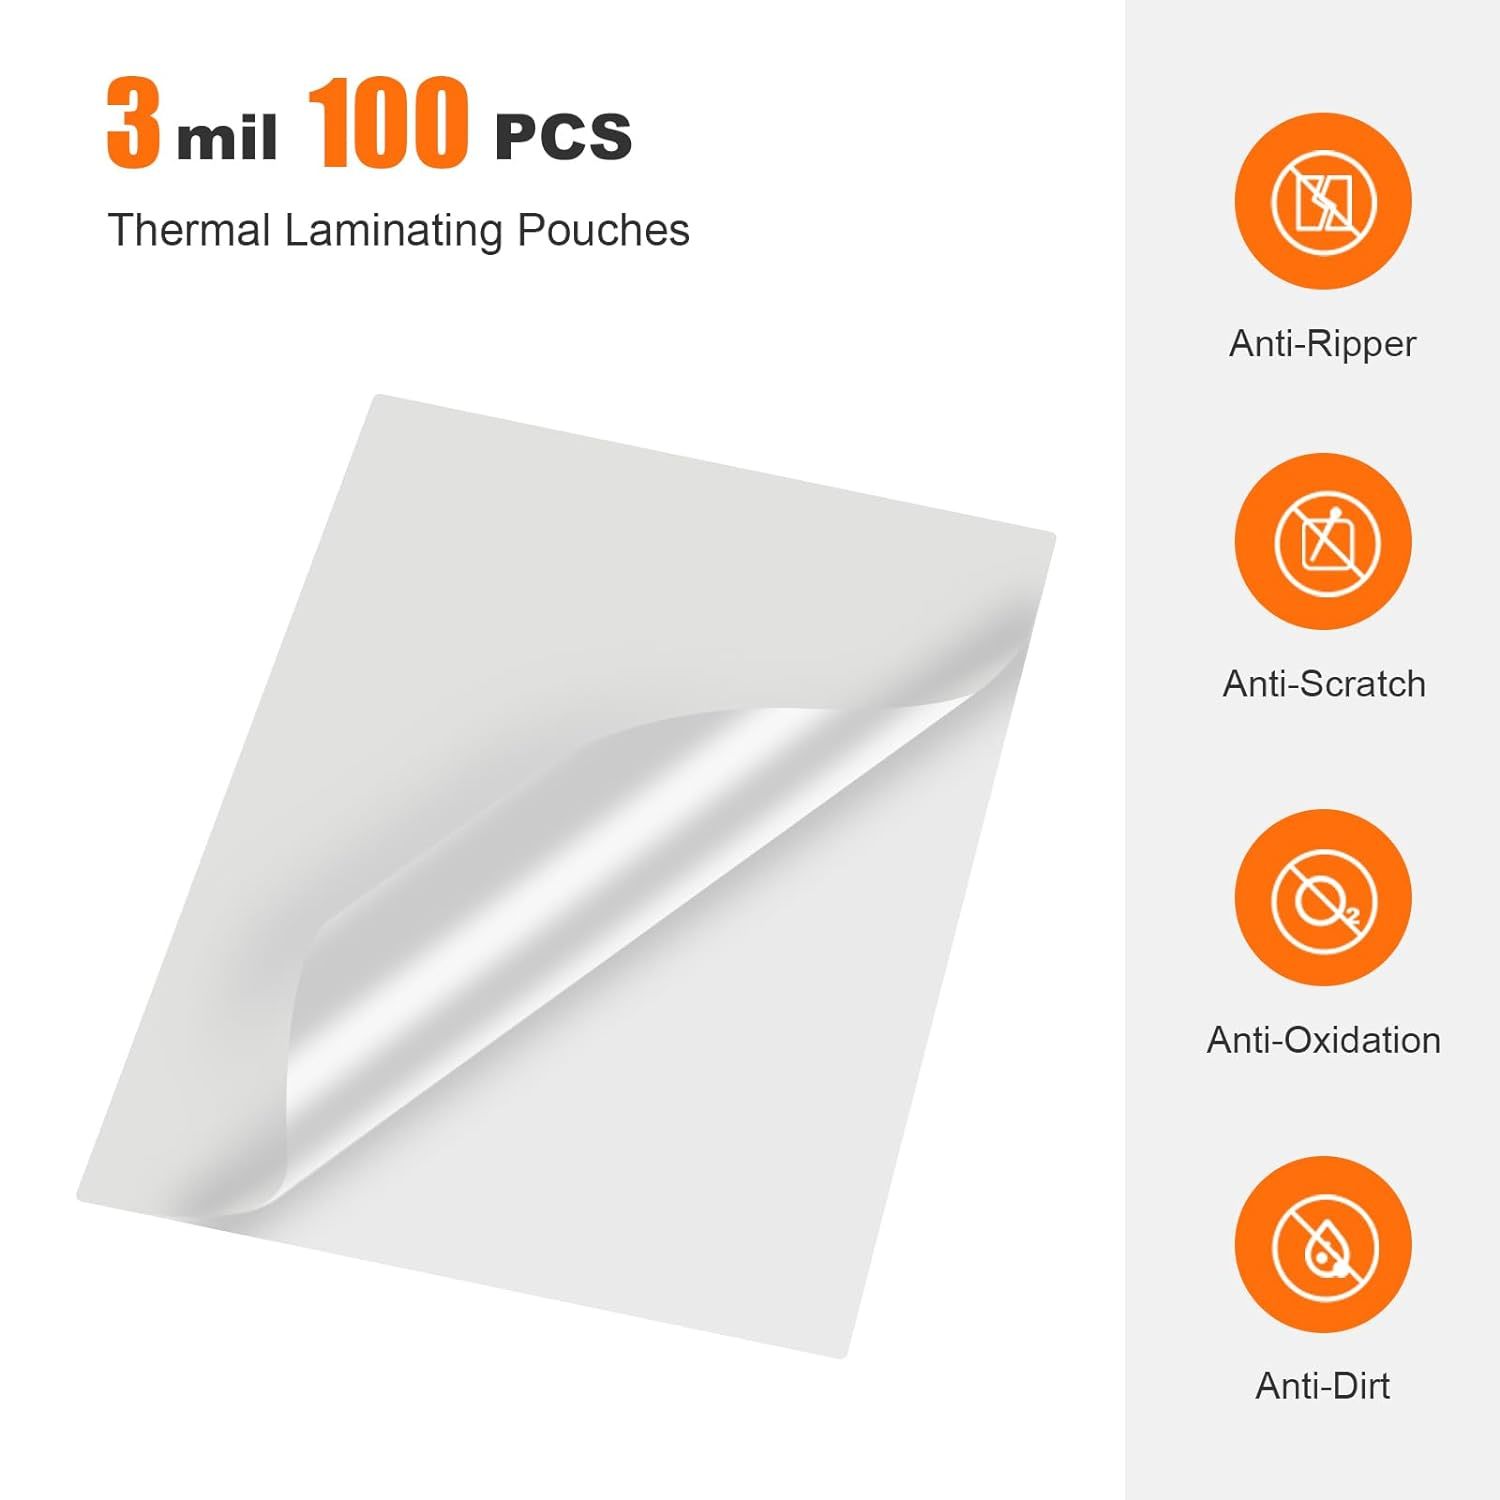 Self Adhesive Laminating Sheets, 2.6 x 3.9 Inches, 4 Mil Thick, 30 Pack  Seal Sealing Lamination Sheets, Suited for Business Card Laminating Pouches  2